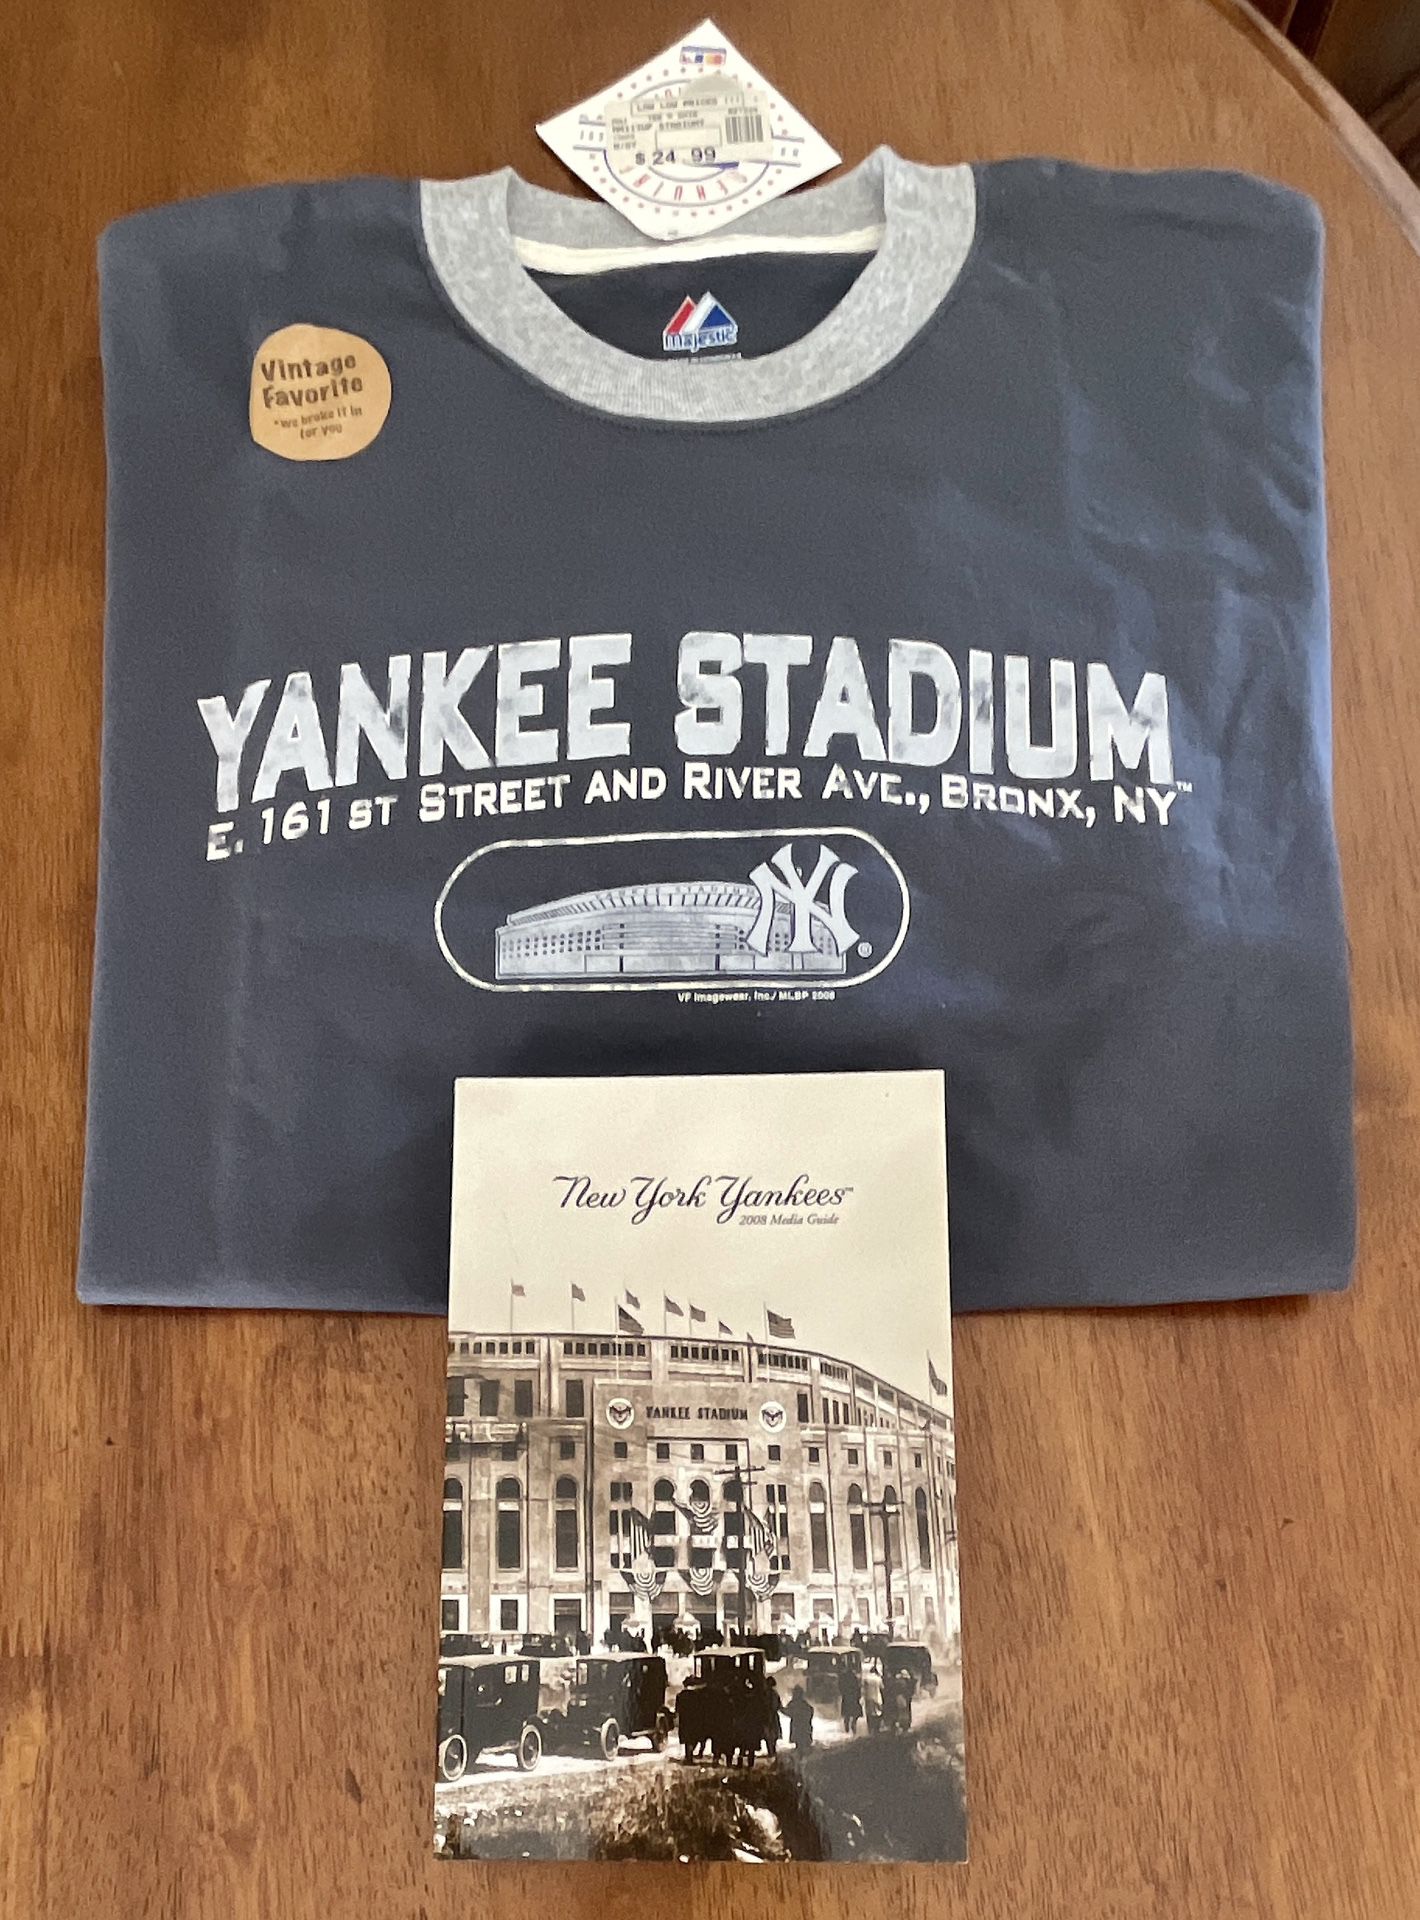 Collectible New York Yankees Jerseys for sale near San Diego